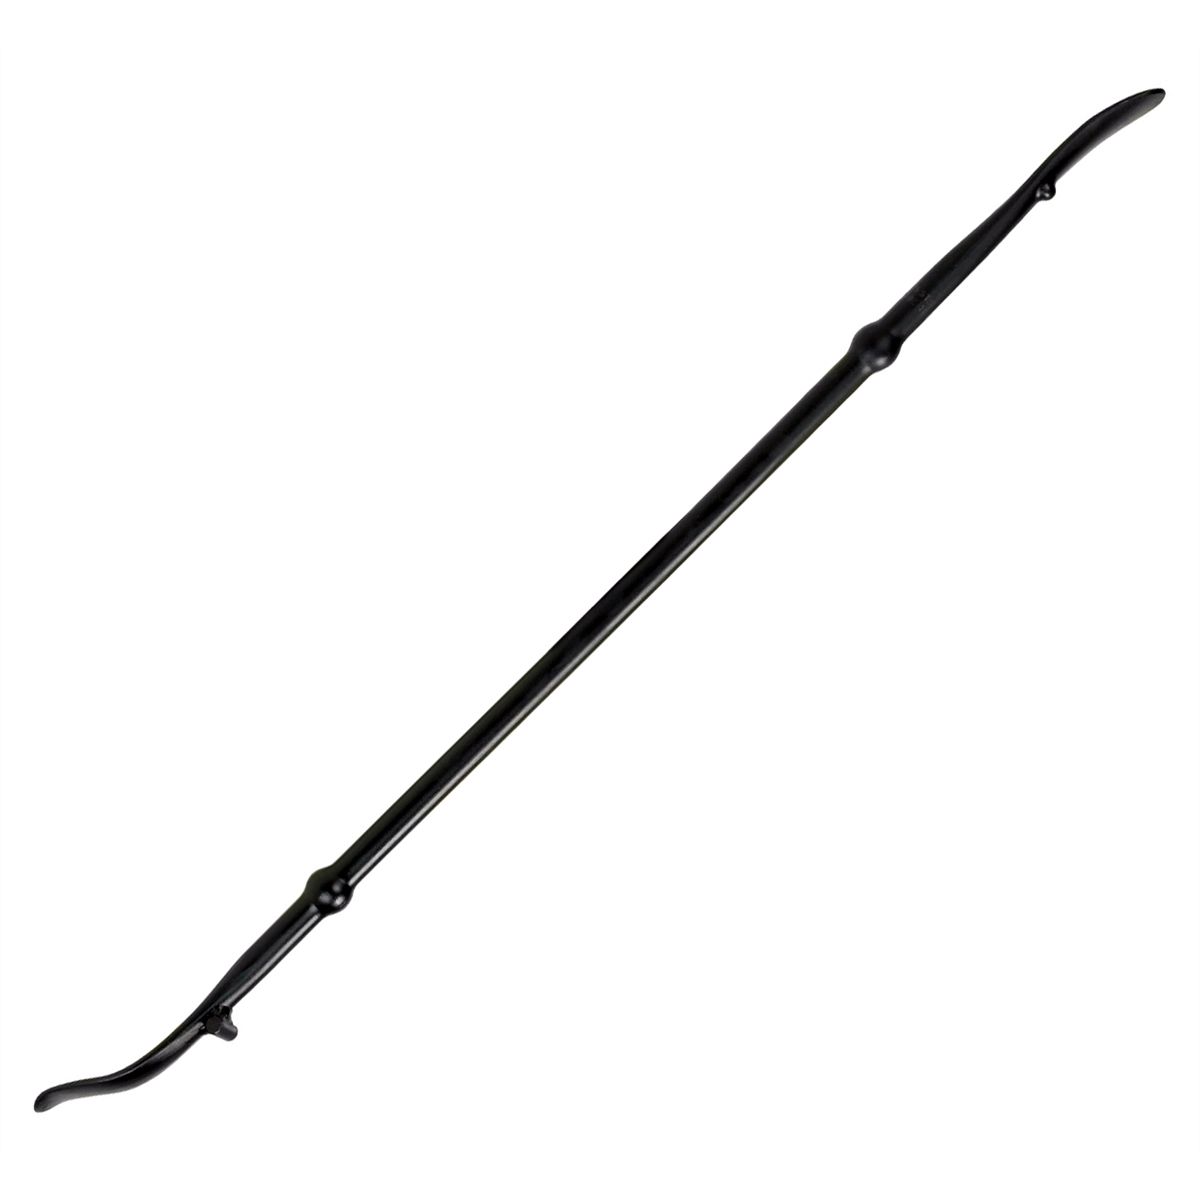 Double End Curved and Flat Tip Curved Tire Spoon 35"